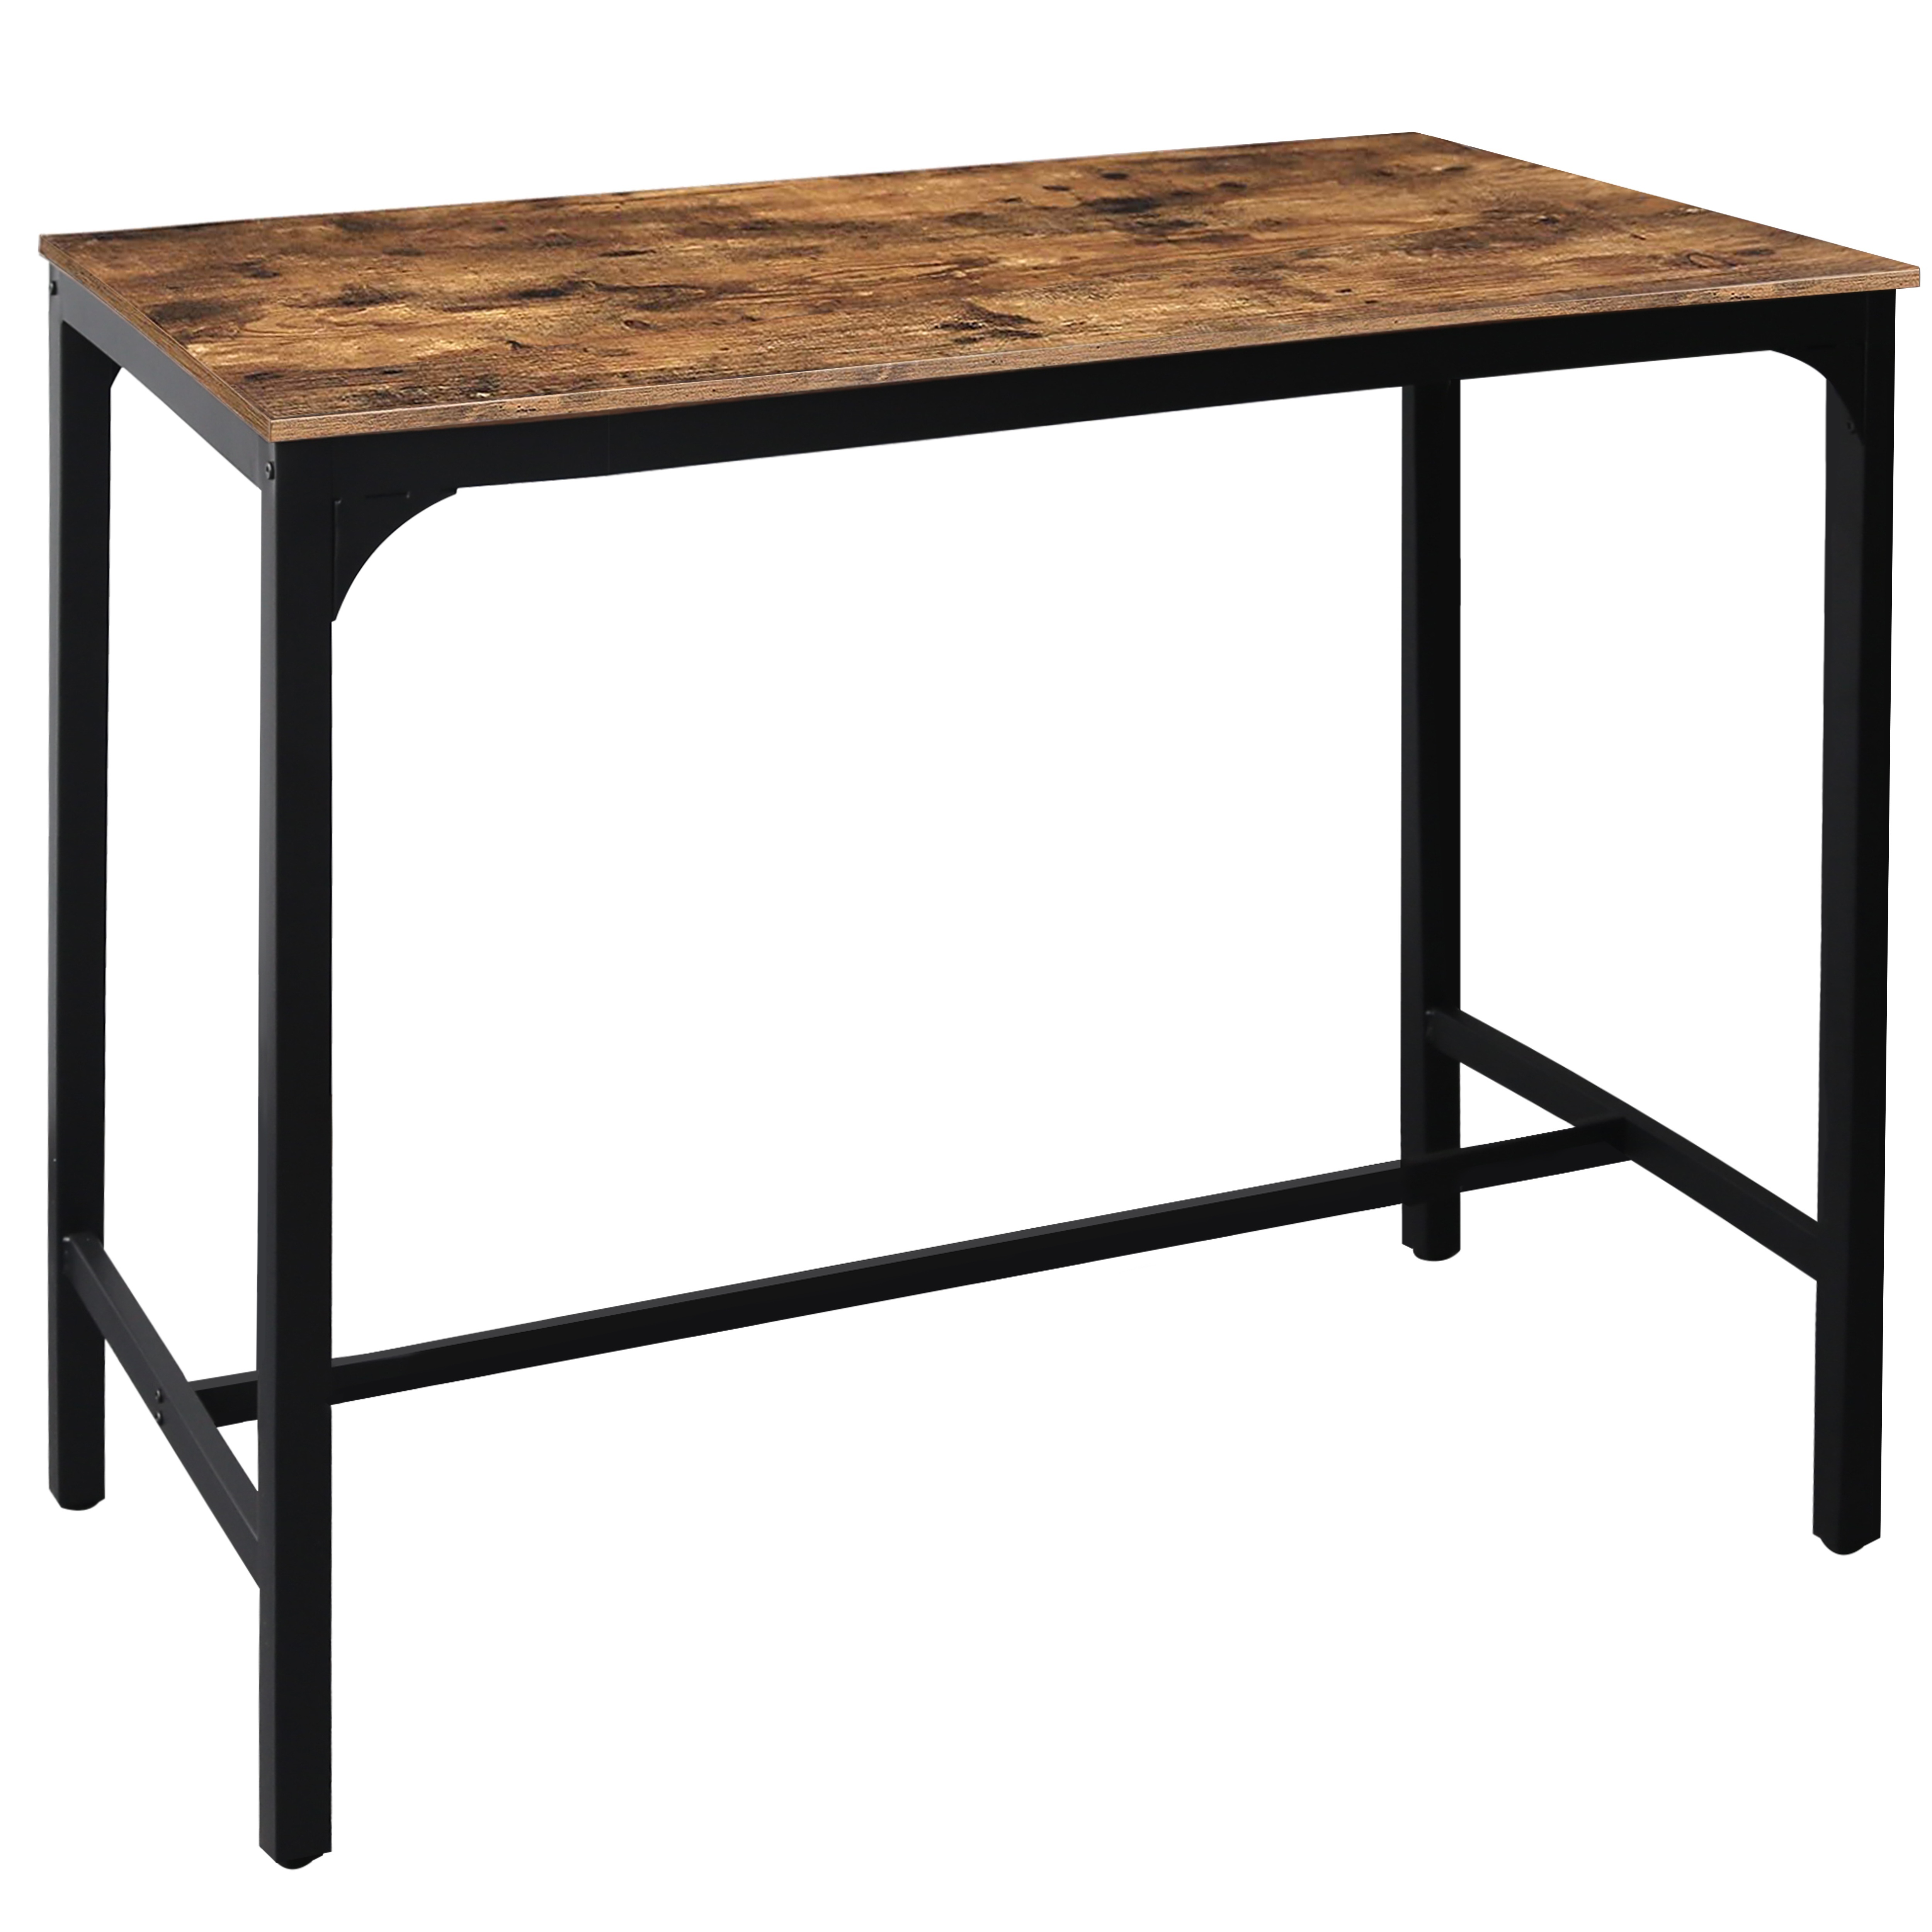 

47'' High Bar Table Industrial Dining Table, Kitchen Or Living Room, Tall Counter Height Pub Table For Dining Room, 47.2''l X 23.6''w X 41.7''h, Rustic Brown